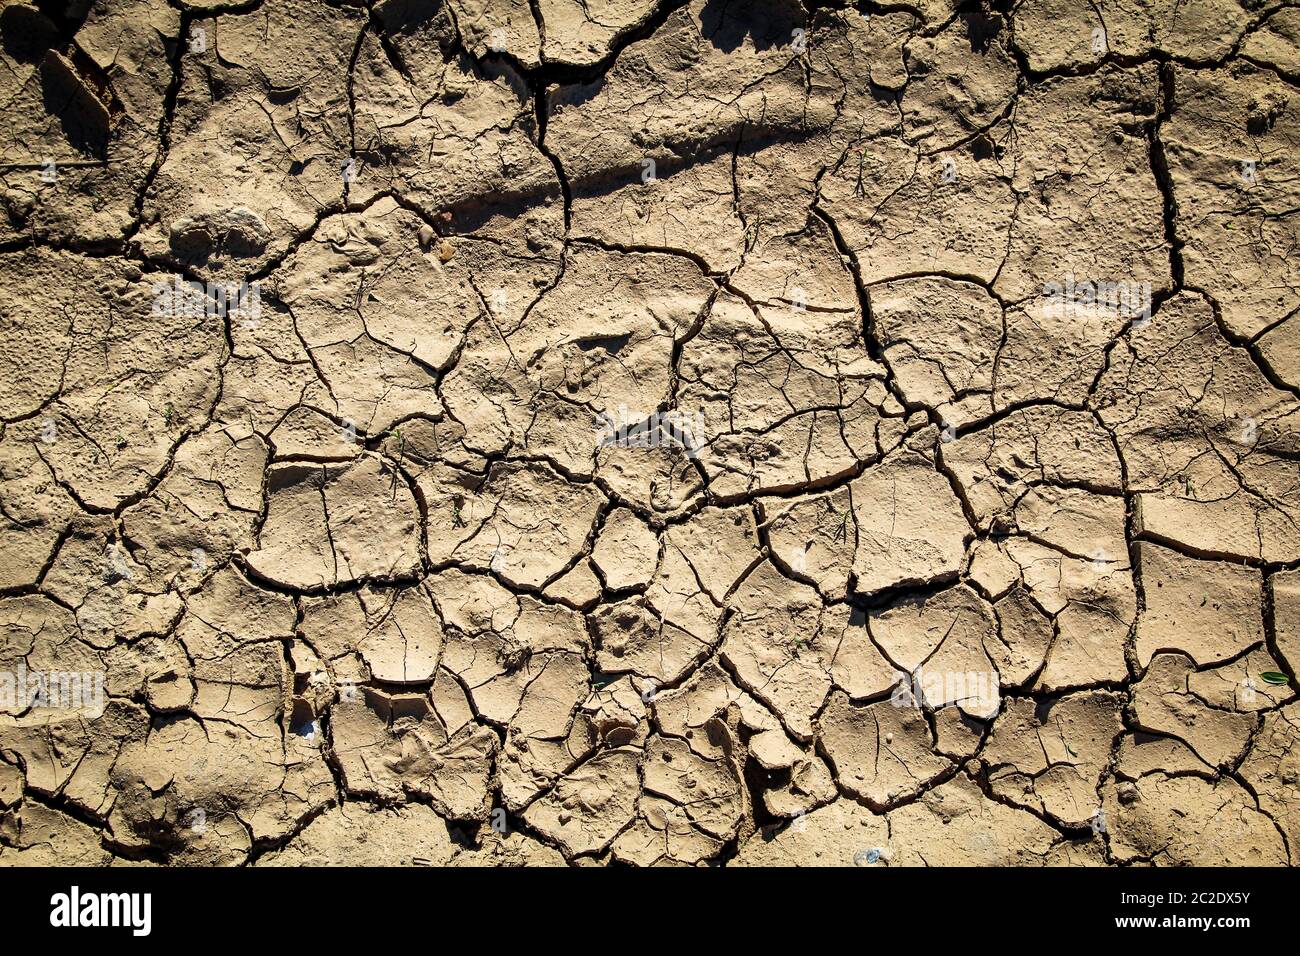 due to lack of rain, the earth dried up with cracks, climate change Stock Photo